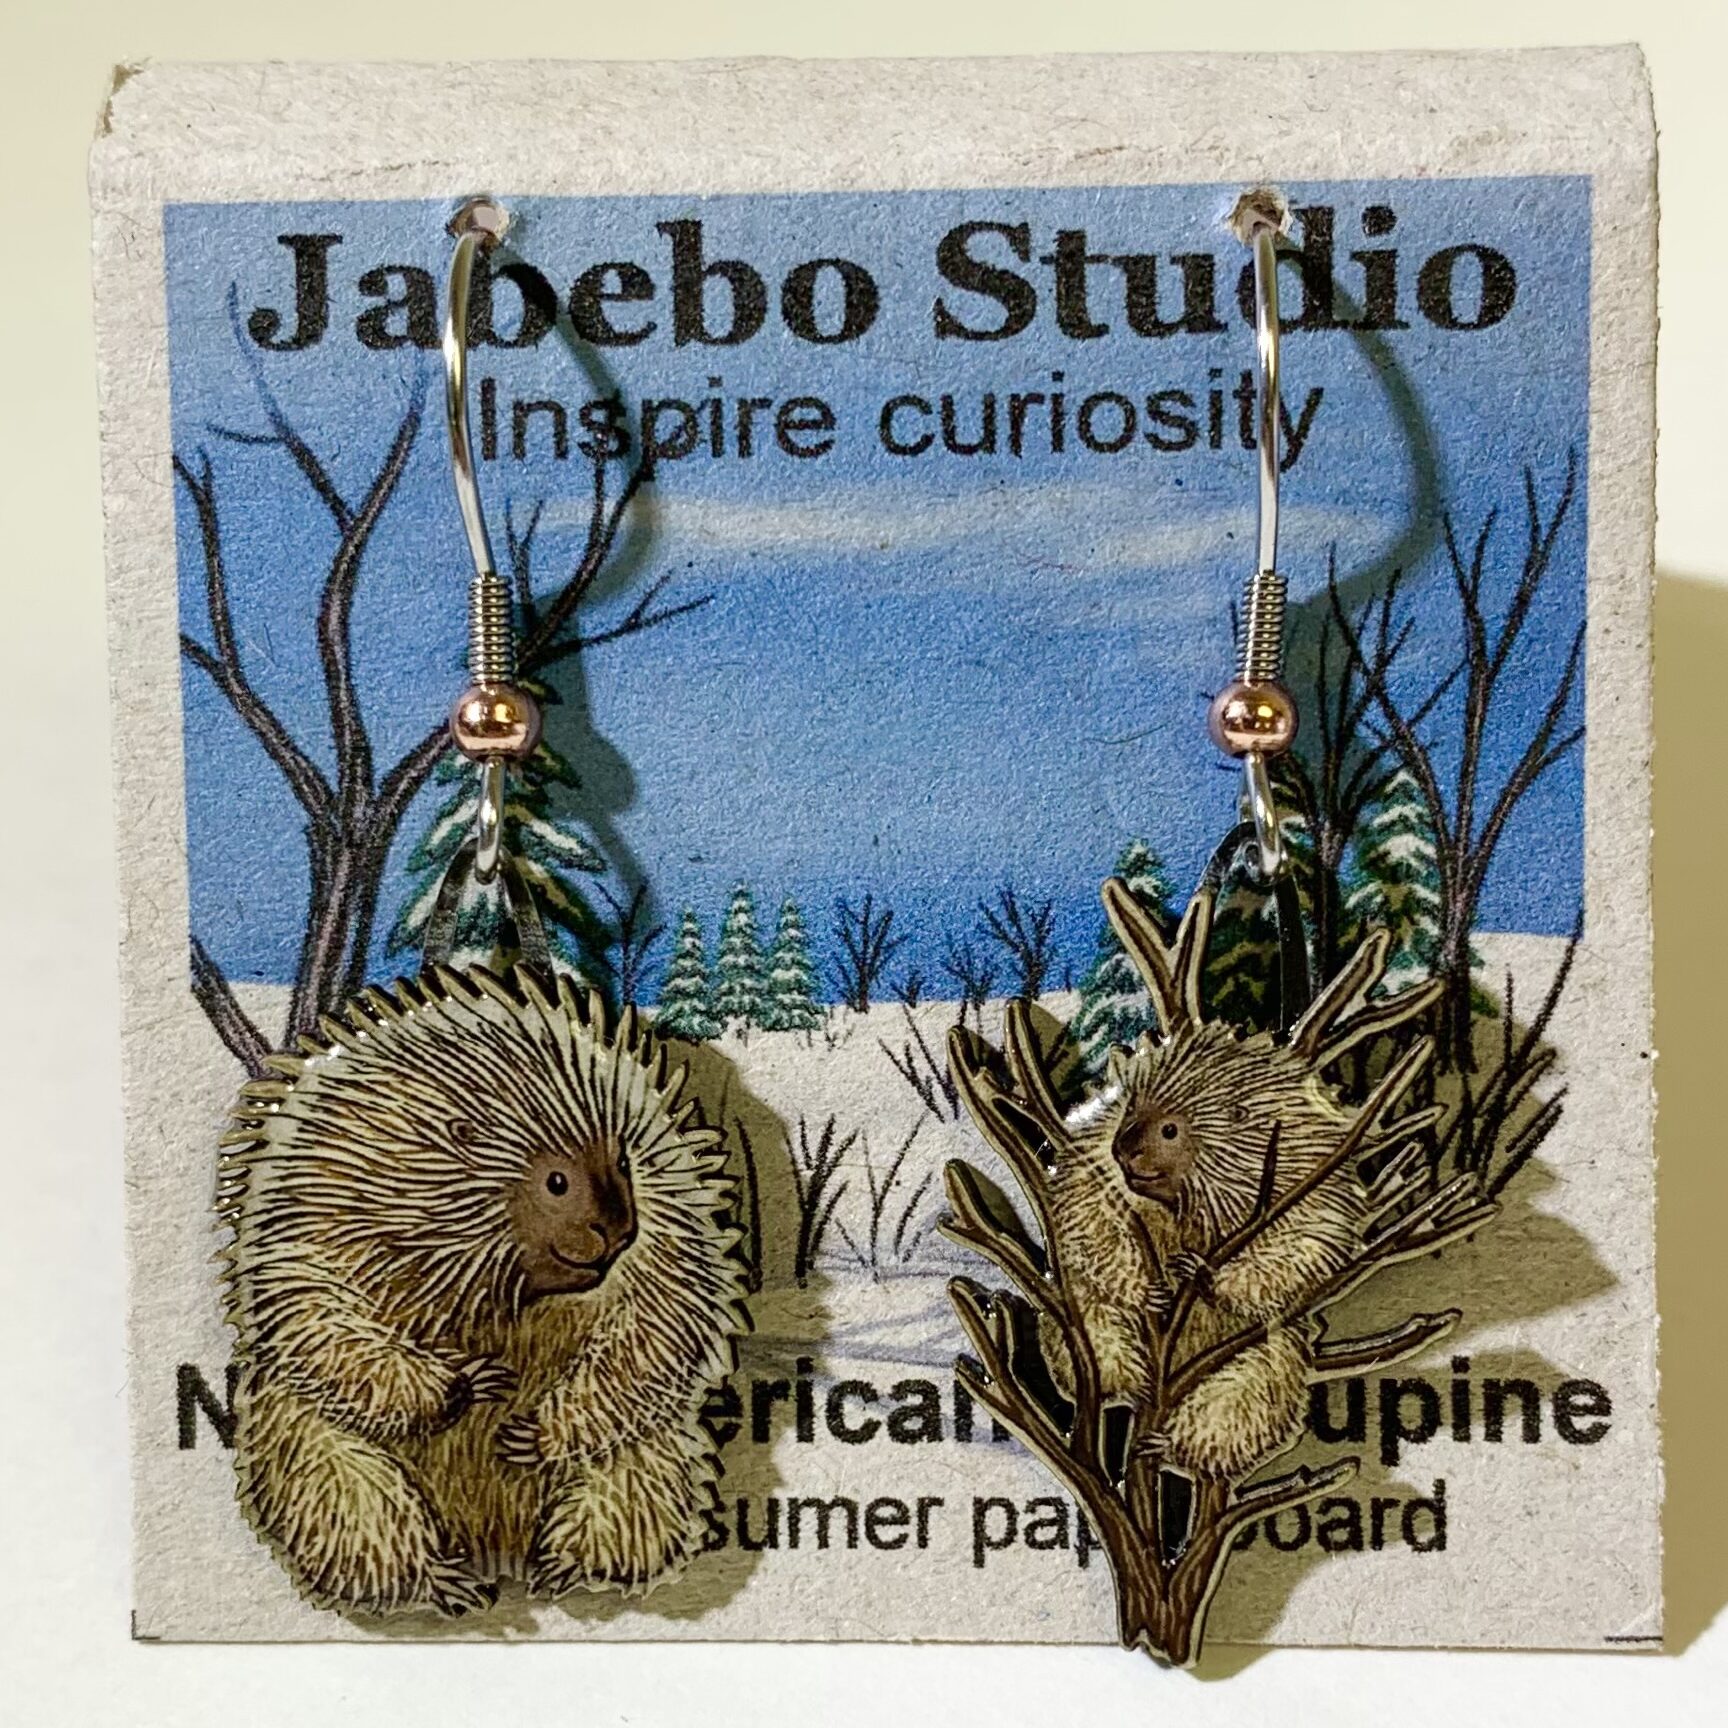 Picture shown is of 1 inch tall pair of earrings of the animal the North American Porcupine.